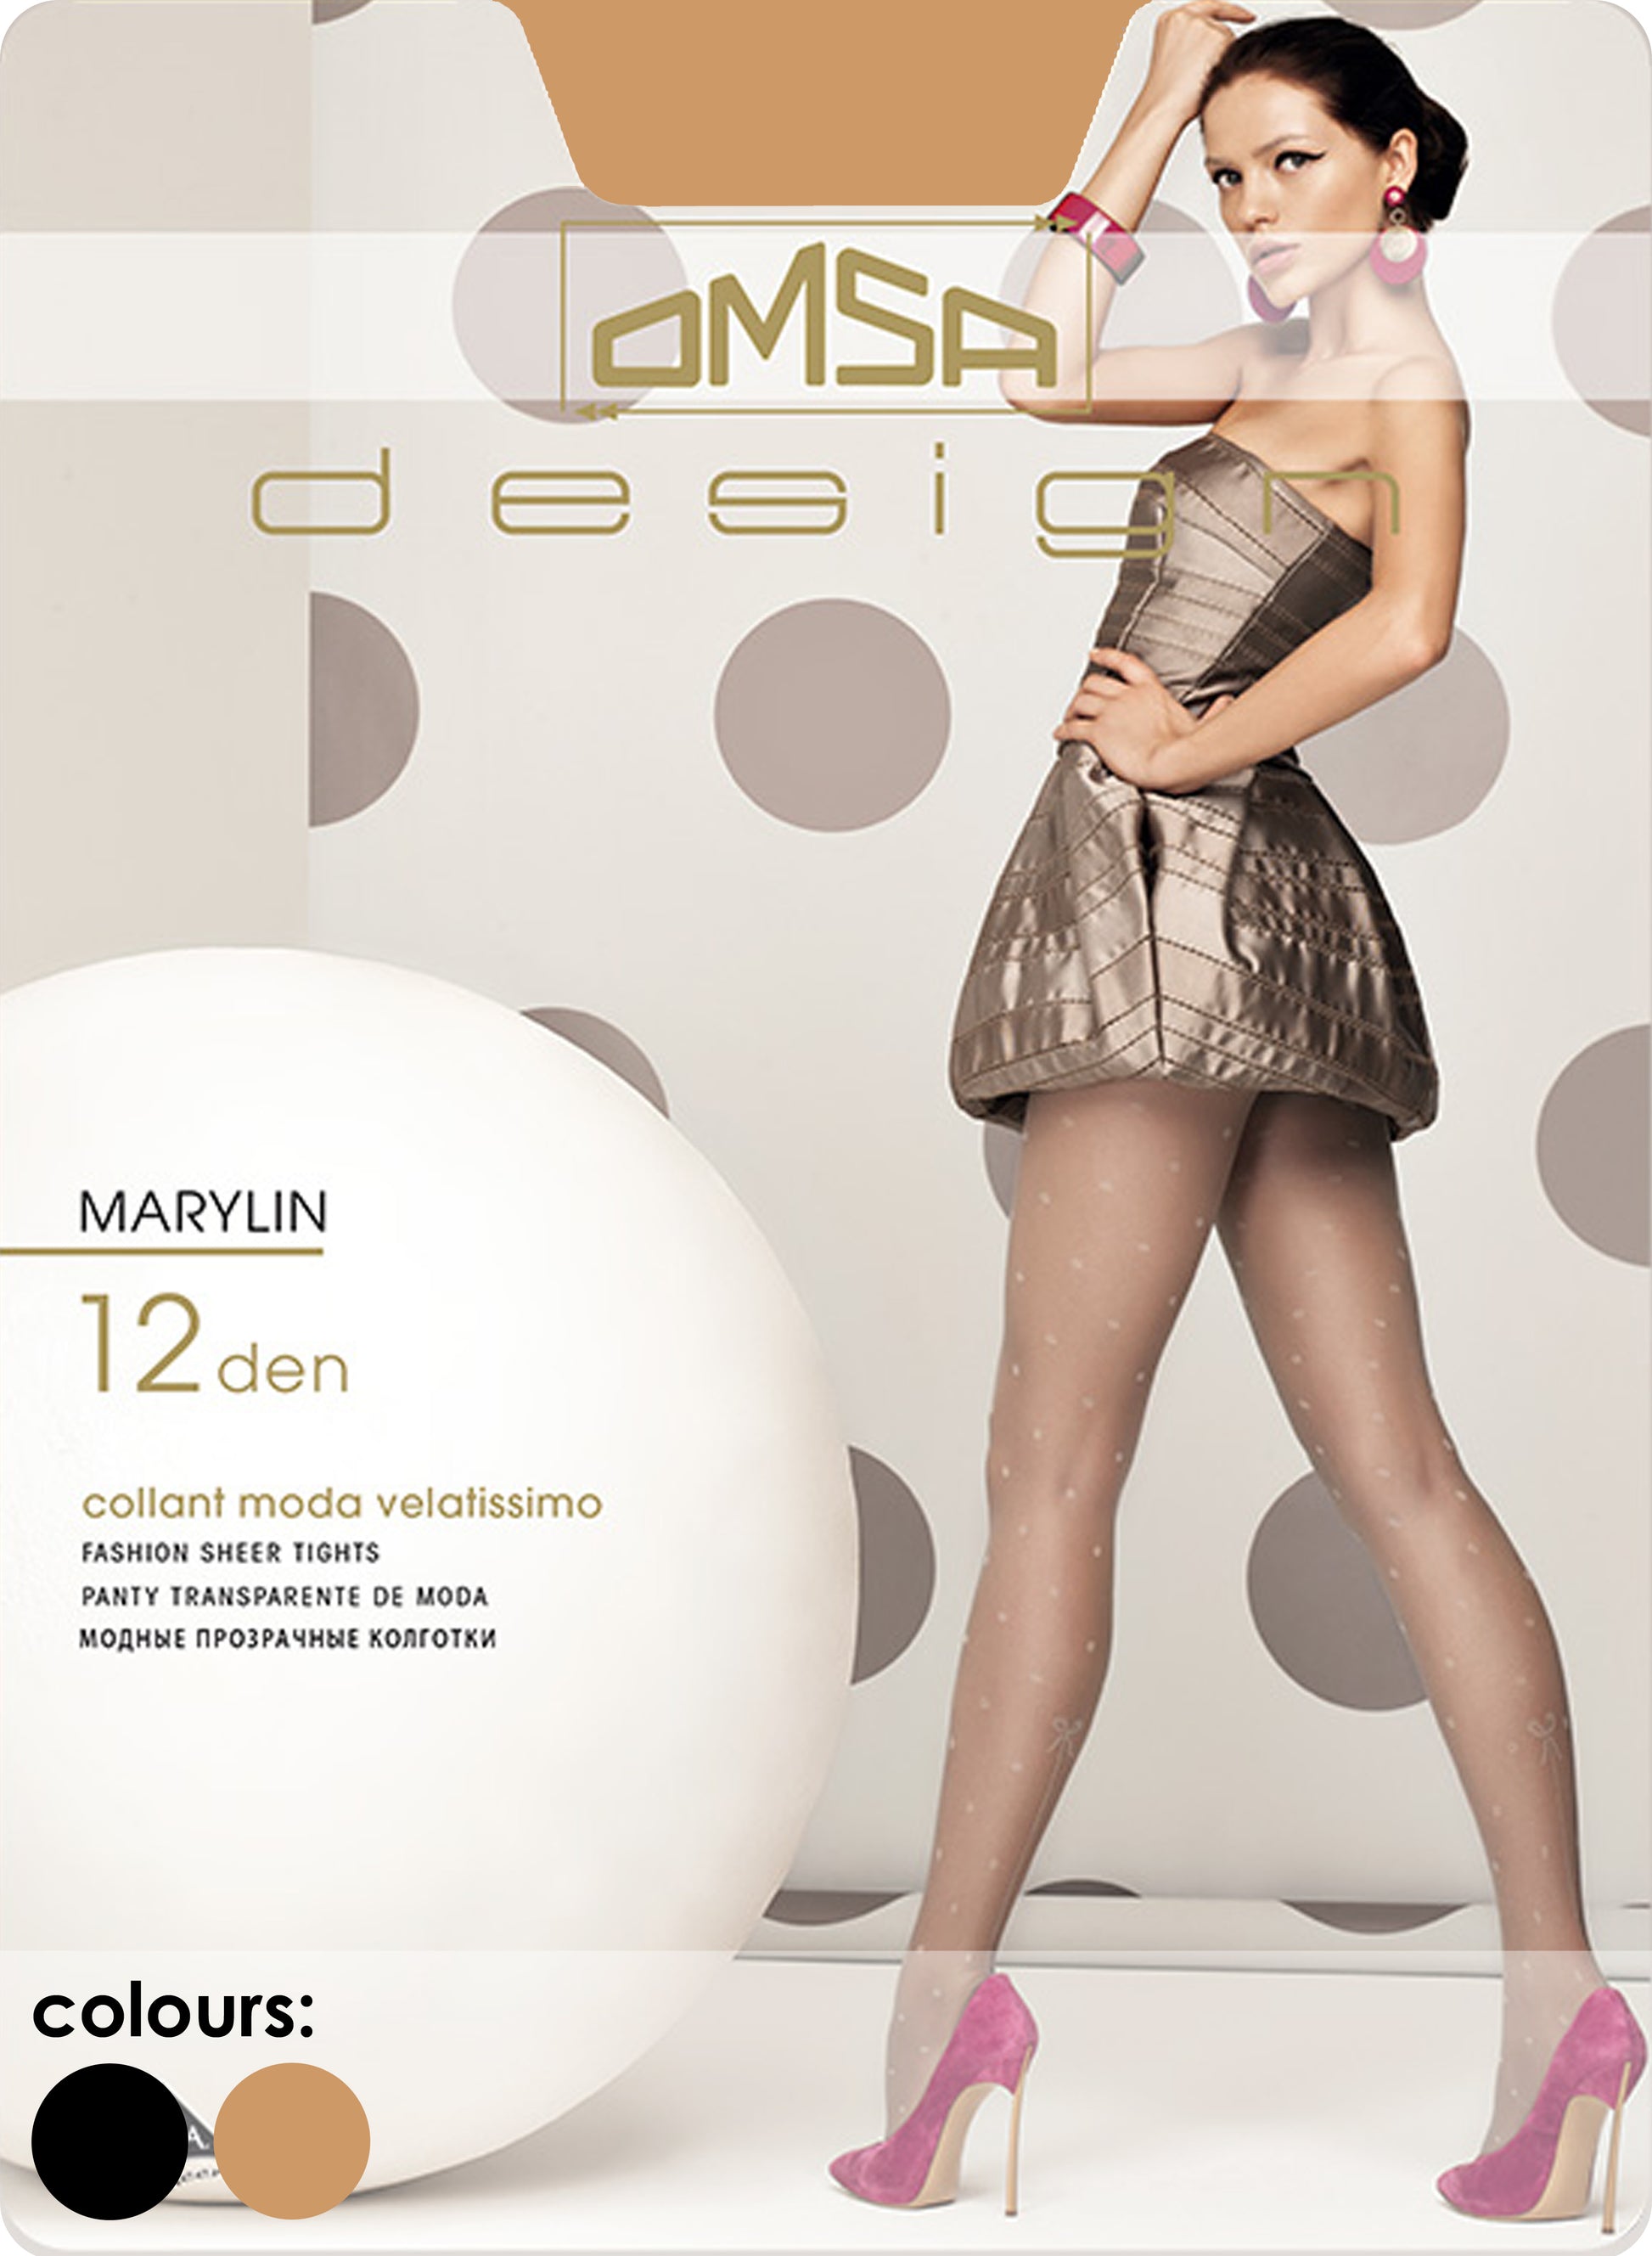 Omsa 3394 Marylin Collant - Sheer woven fashion tights with contrast polka dot pattern and a half back seam to the calf with a bow on top, flat seams, hygienic gusset and invisible toes. Available in black and nude.